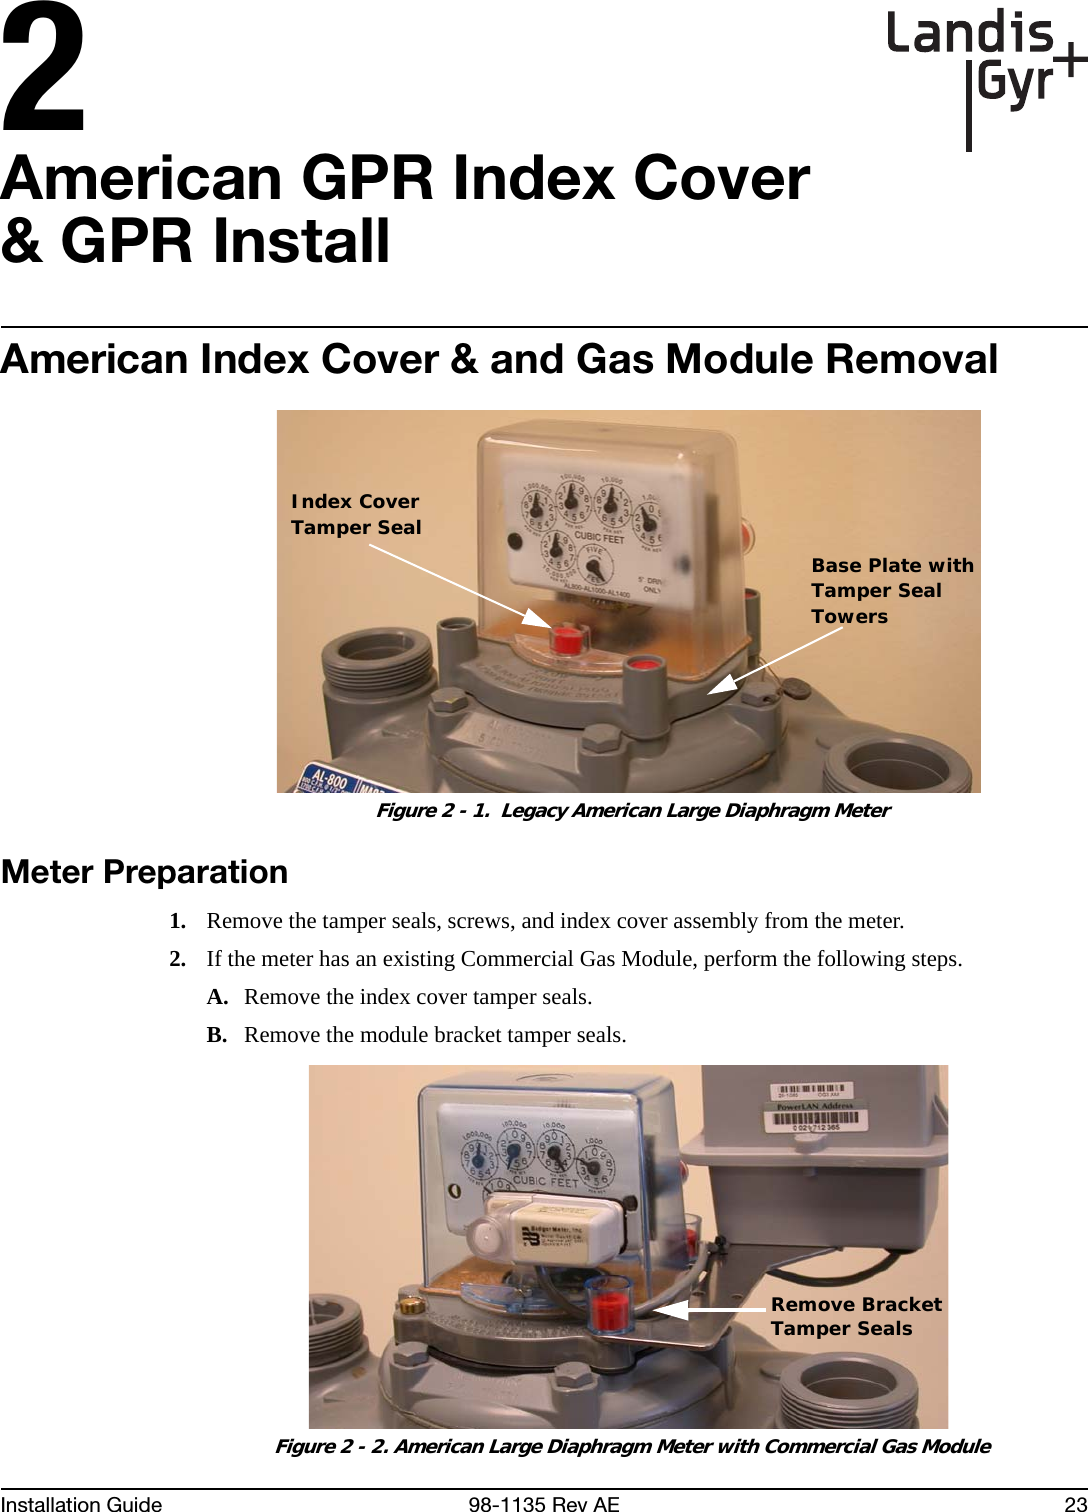 2Installation Guide 98-1135 Rev AE 23American GPR Index Cover &amp; GPR InstallAmerican Index Cover &amp; and Gas Module Removal Figure 2 - 1.  Legacy American Large Diaphragm MeterMeter Preparation1. Remove the tamper seals, screws, and index cover assembly from the meter.2. If the meter has an existing Commercial Gas Module, perform the following steps.A. Remove the index cover tamper seals.B. Remove the module bracket tamper seals. Figure 2 - 2. American Large Diaphragm Meter with Commercial Gas ModuleIndex CoverTamper SealBase Plate withTamper SealTowersRemove BracketTamper Seals